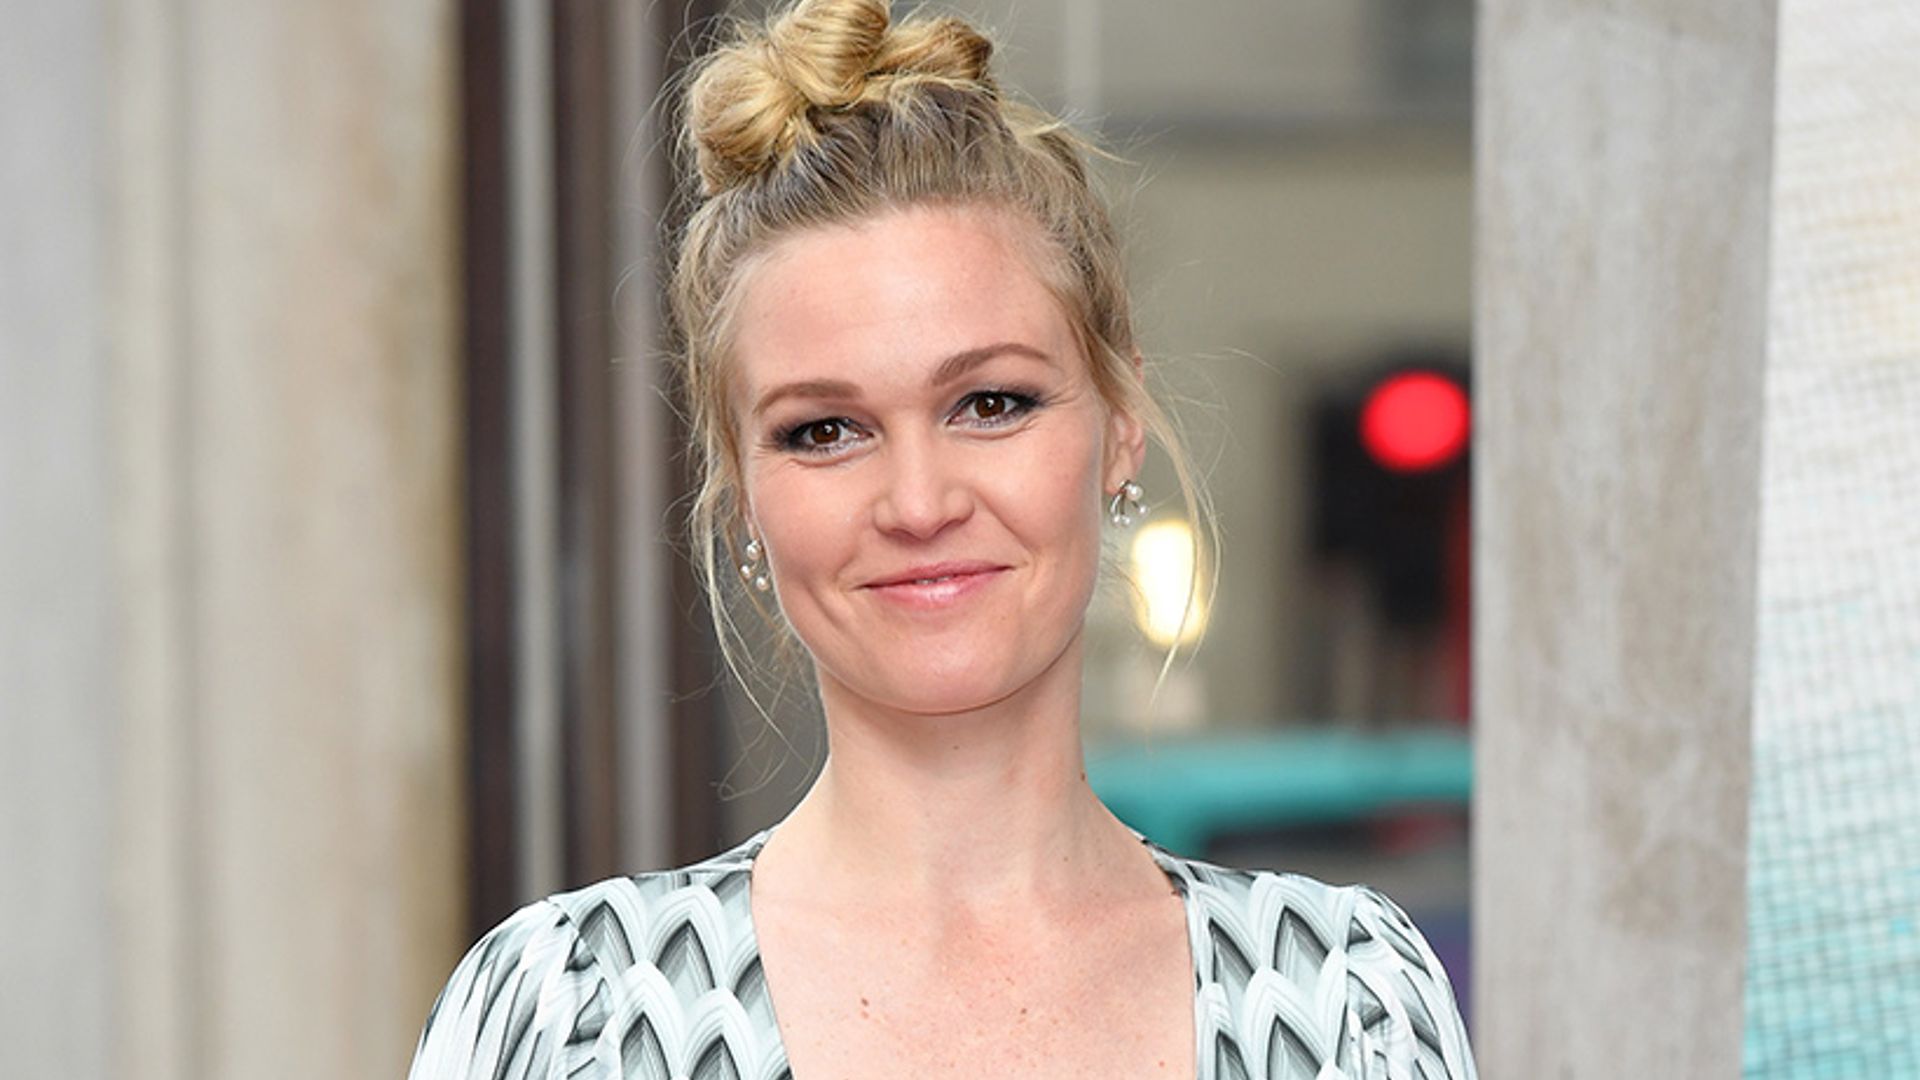 Julia Stiles debuts her baby bump: 'I couldn't resist'